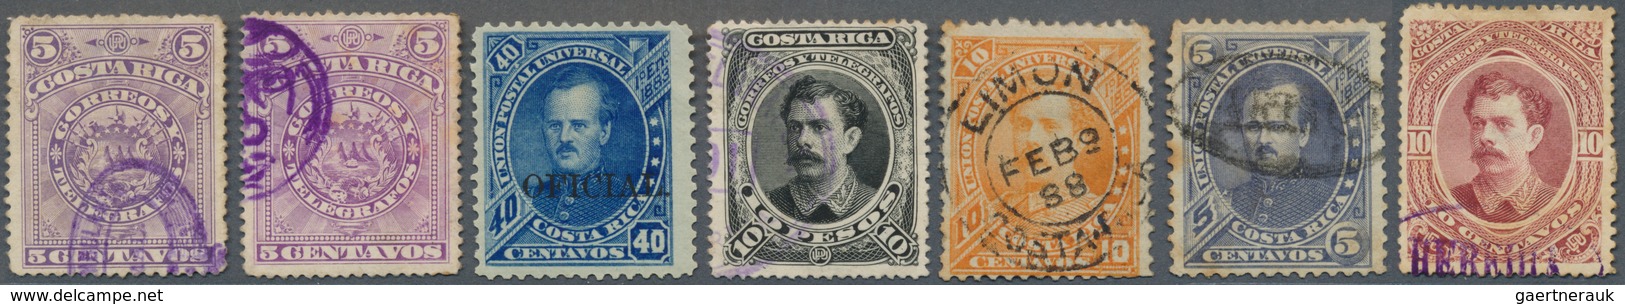 00598 Costa Rica: 1863/1870, The First Issue Specialised Collection Study, from no. 1 mint and used incl.